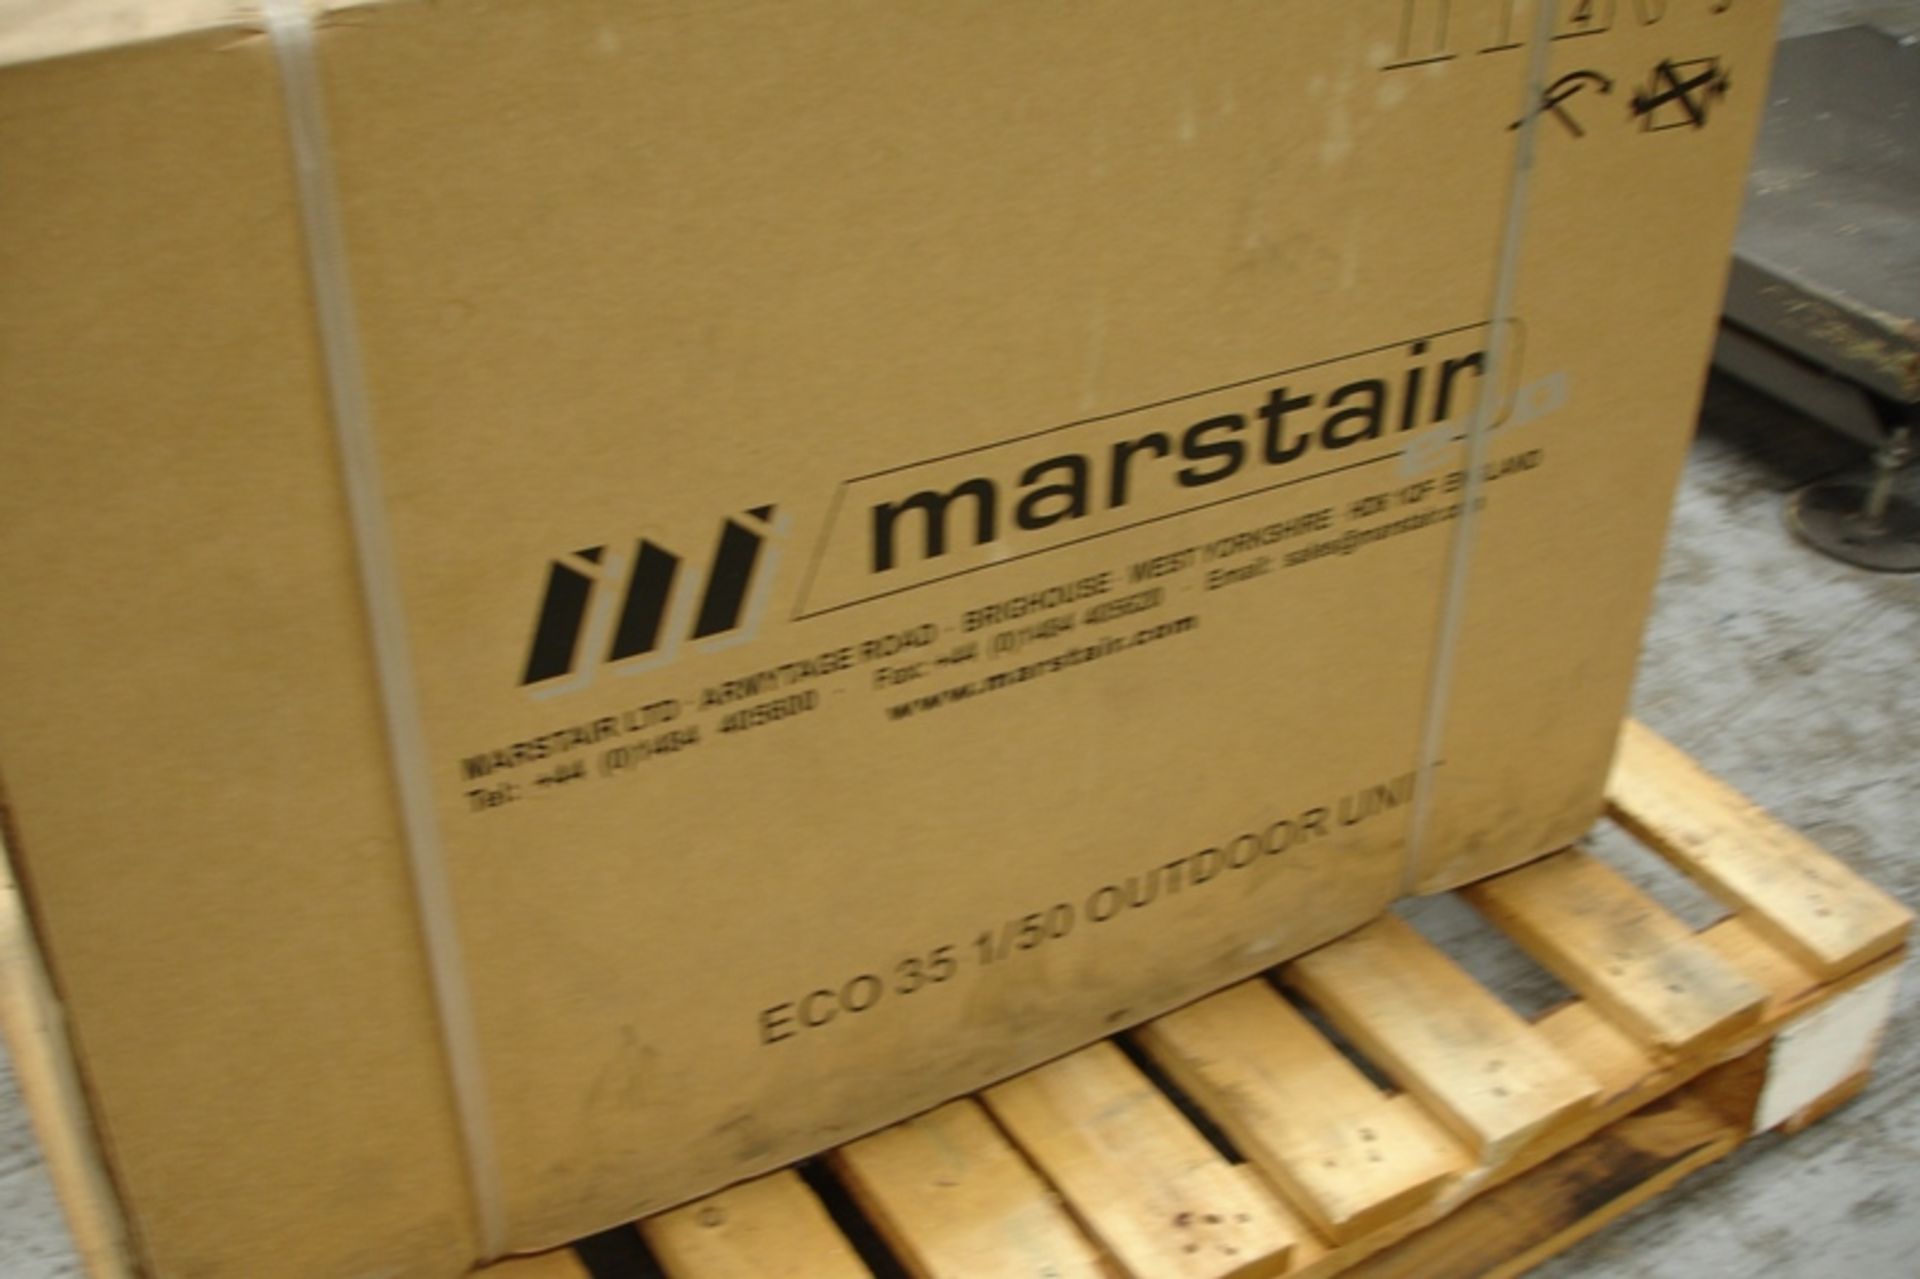 Unused Marstair Air Conditioning system - Image 2 of 3